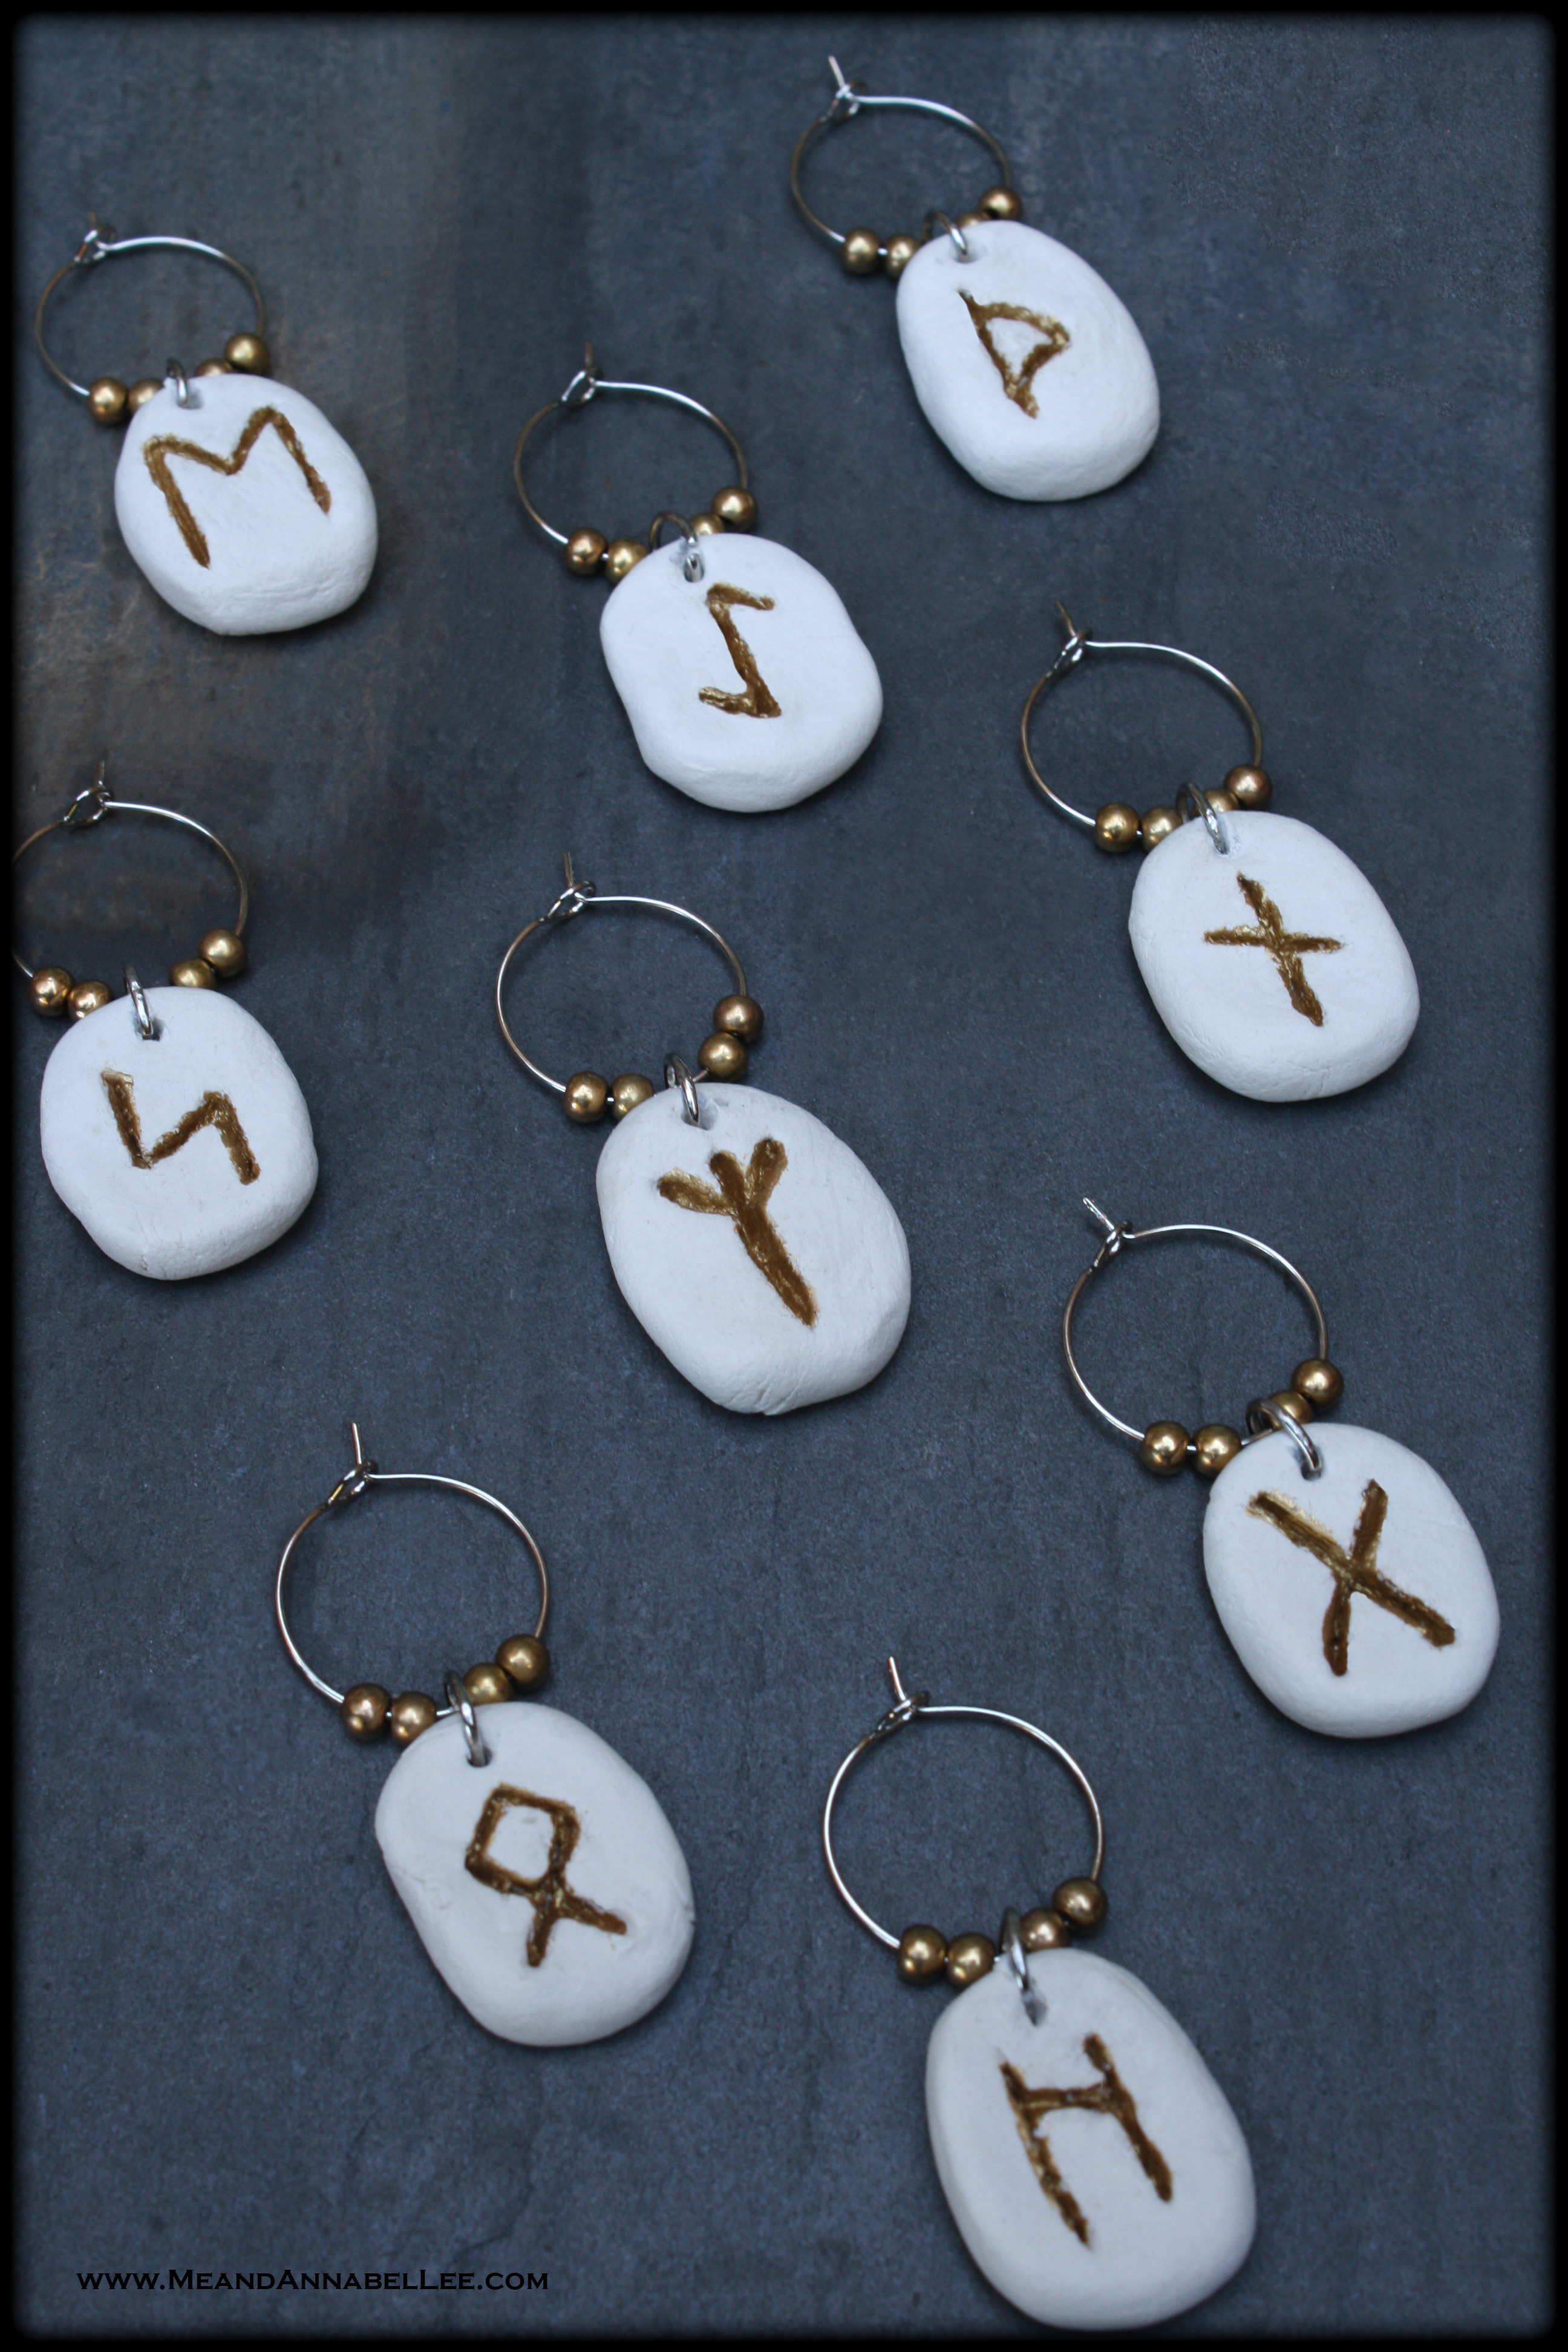 Rune Stone Divination Tool DIY: How to Make Your Own Runes